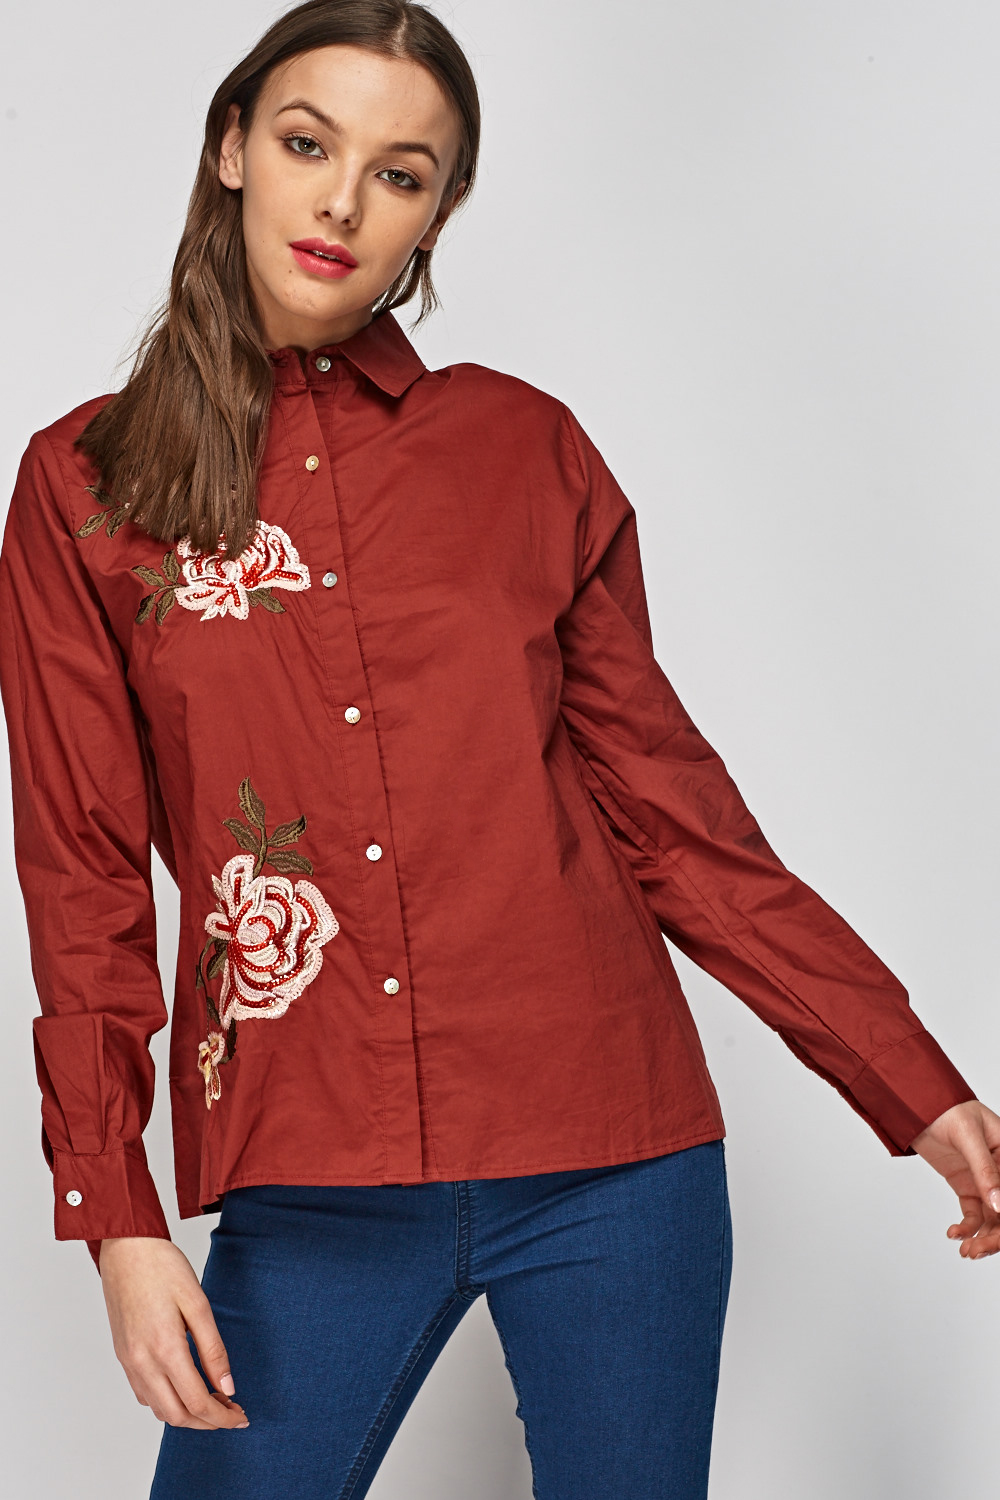 Embroidered Flower Shirt - Just $3